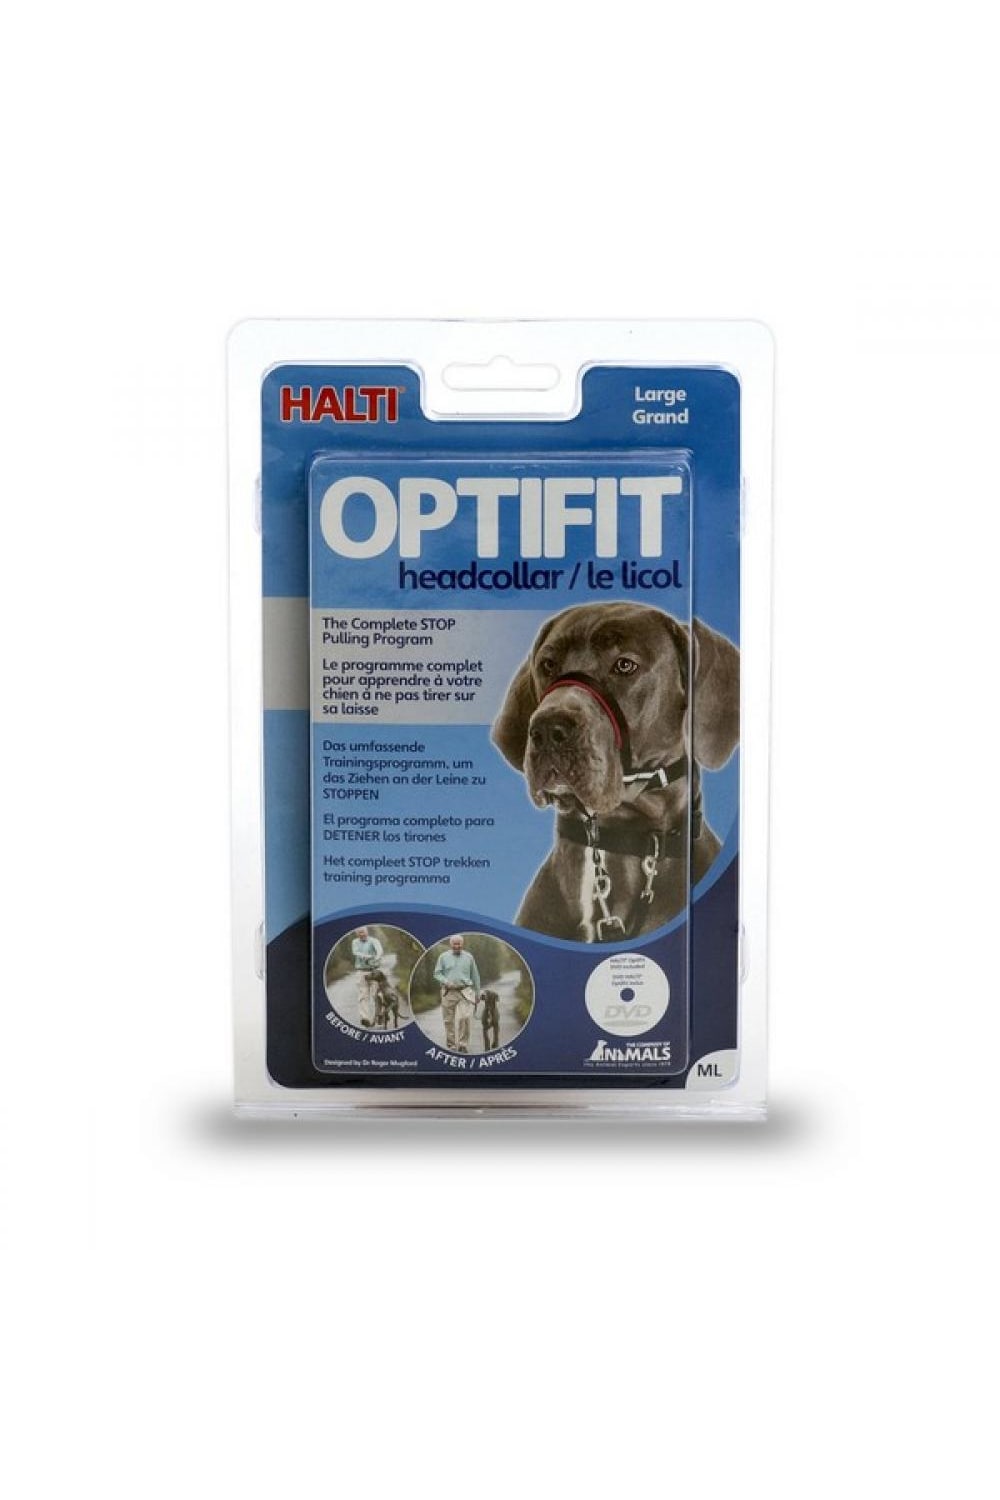 Company Of Animals Halti Optifit Dog Headcollar With Training DVD And Guide (Black) (S)